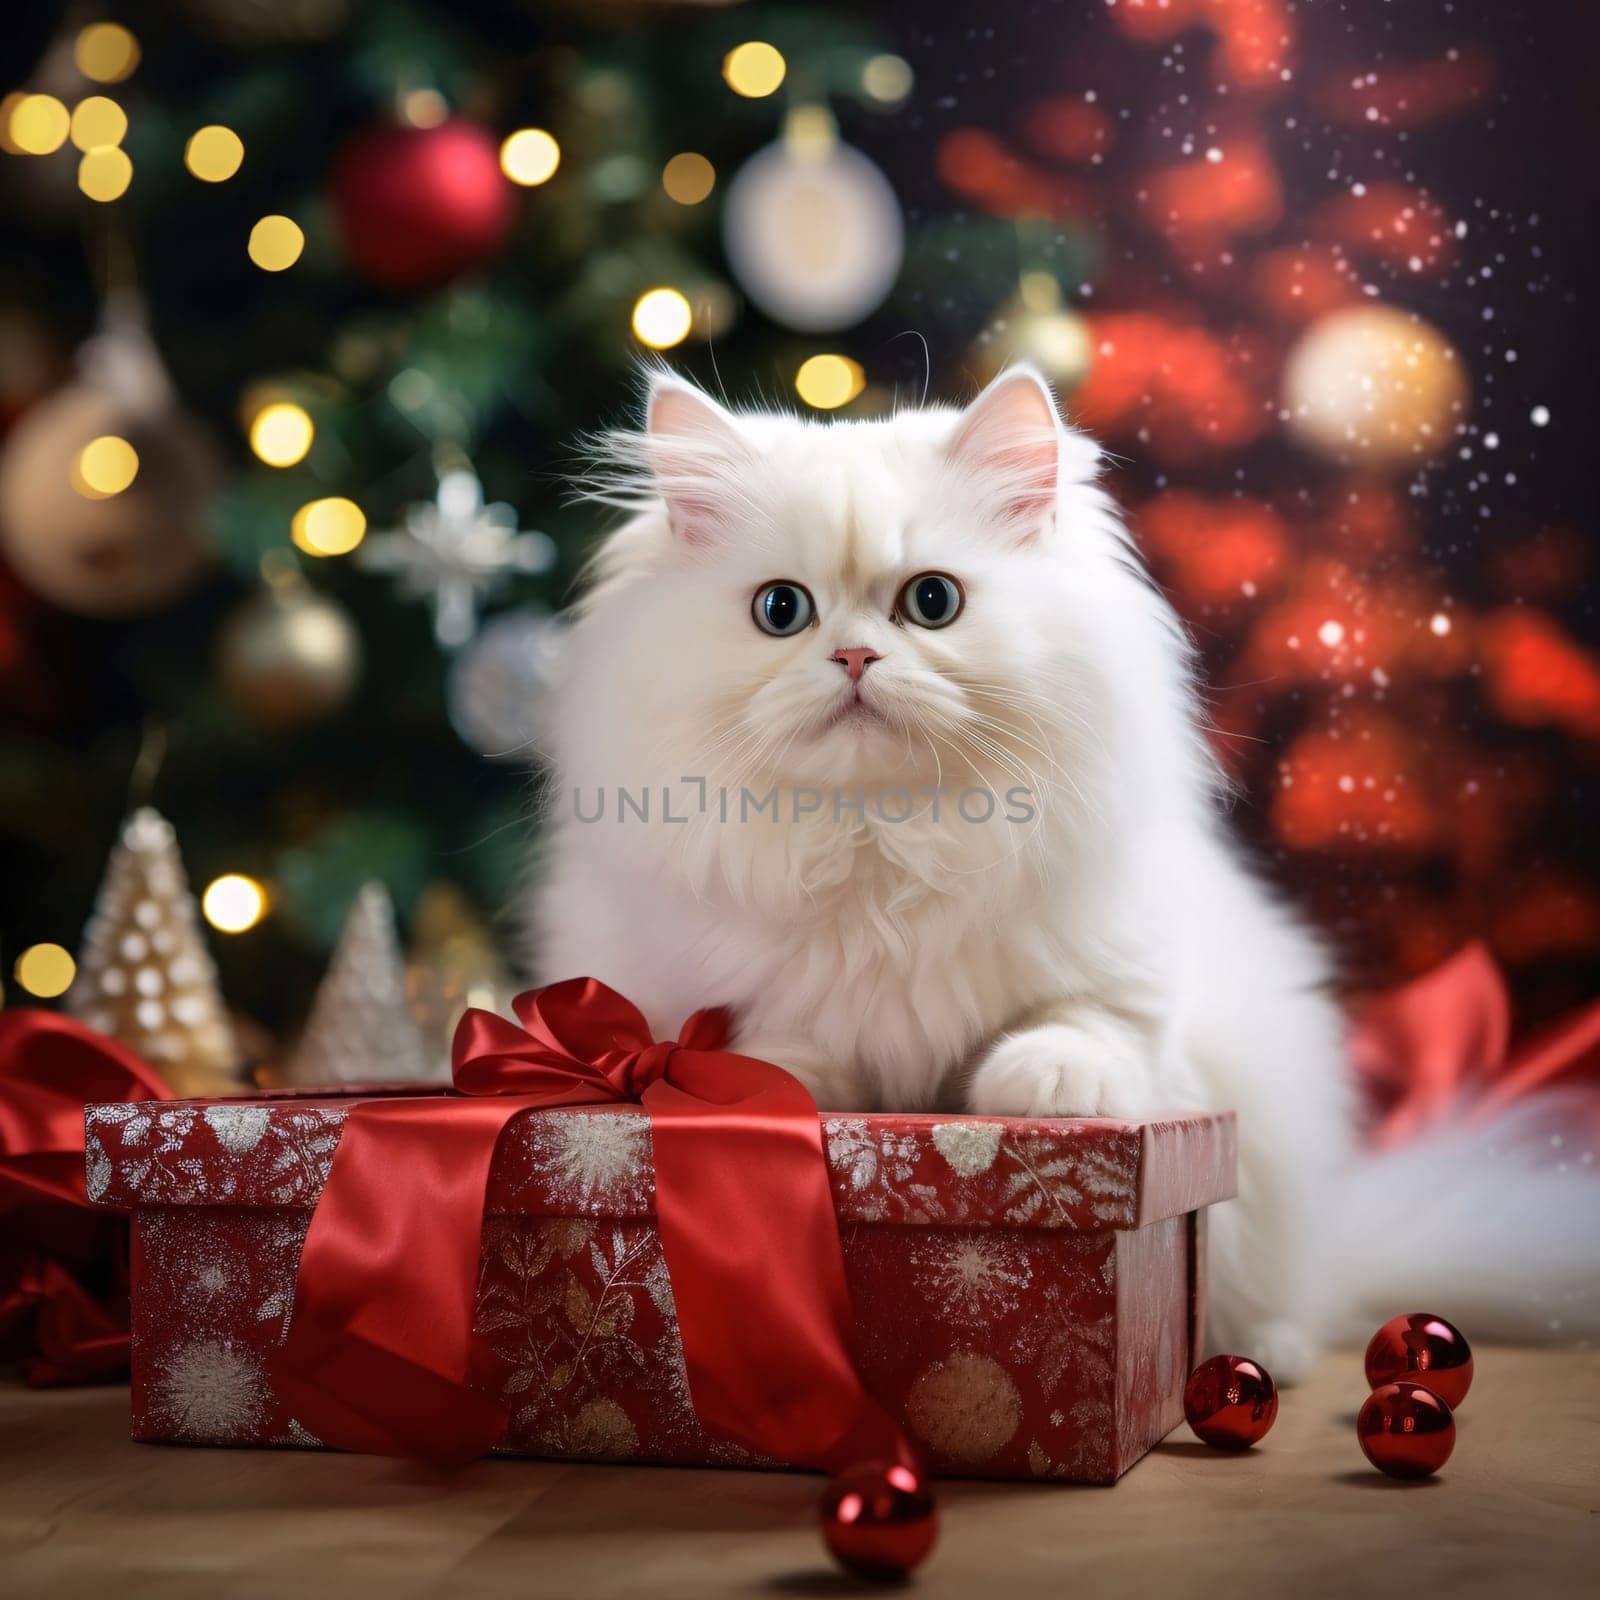 Small white cat over a gift, jumping card in the background, smudged Christmas tree. Gifts as a day symbol of present and love. A time of falling in love and love.